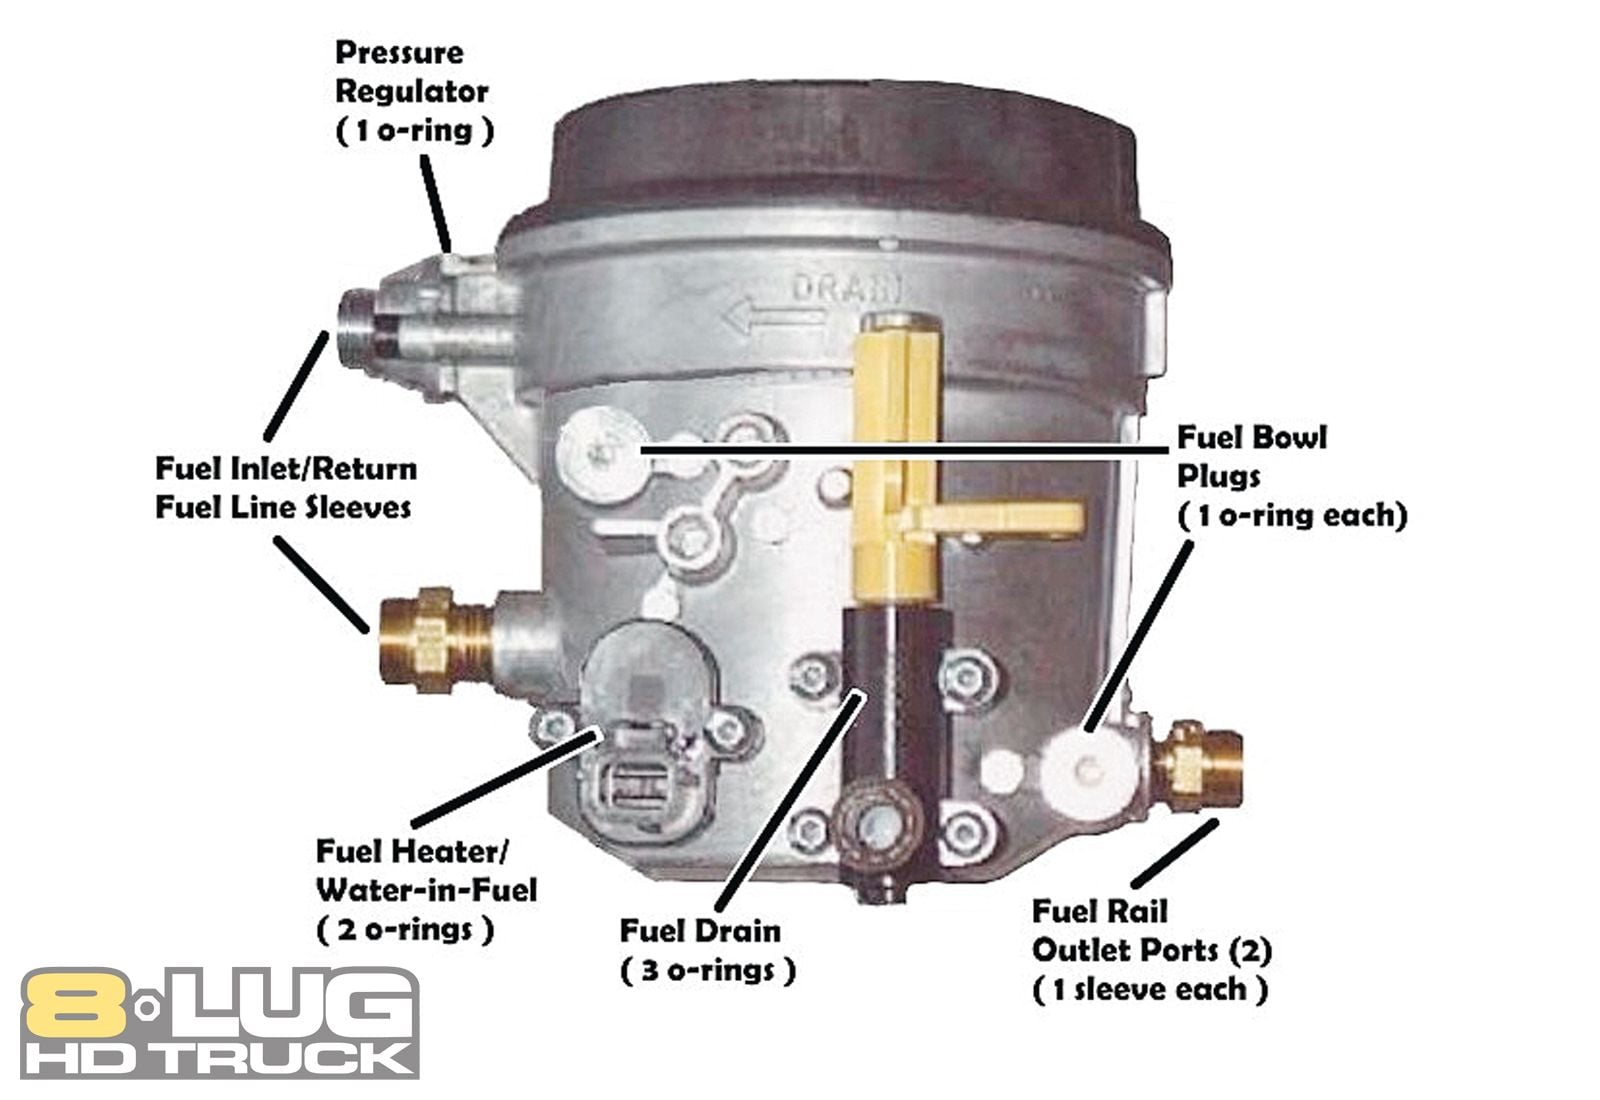 E99 7.3 Fuel Pressure Issue Page 3 Ford Truck.